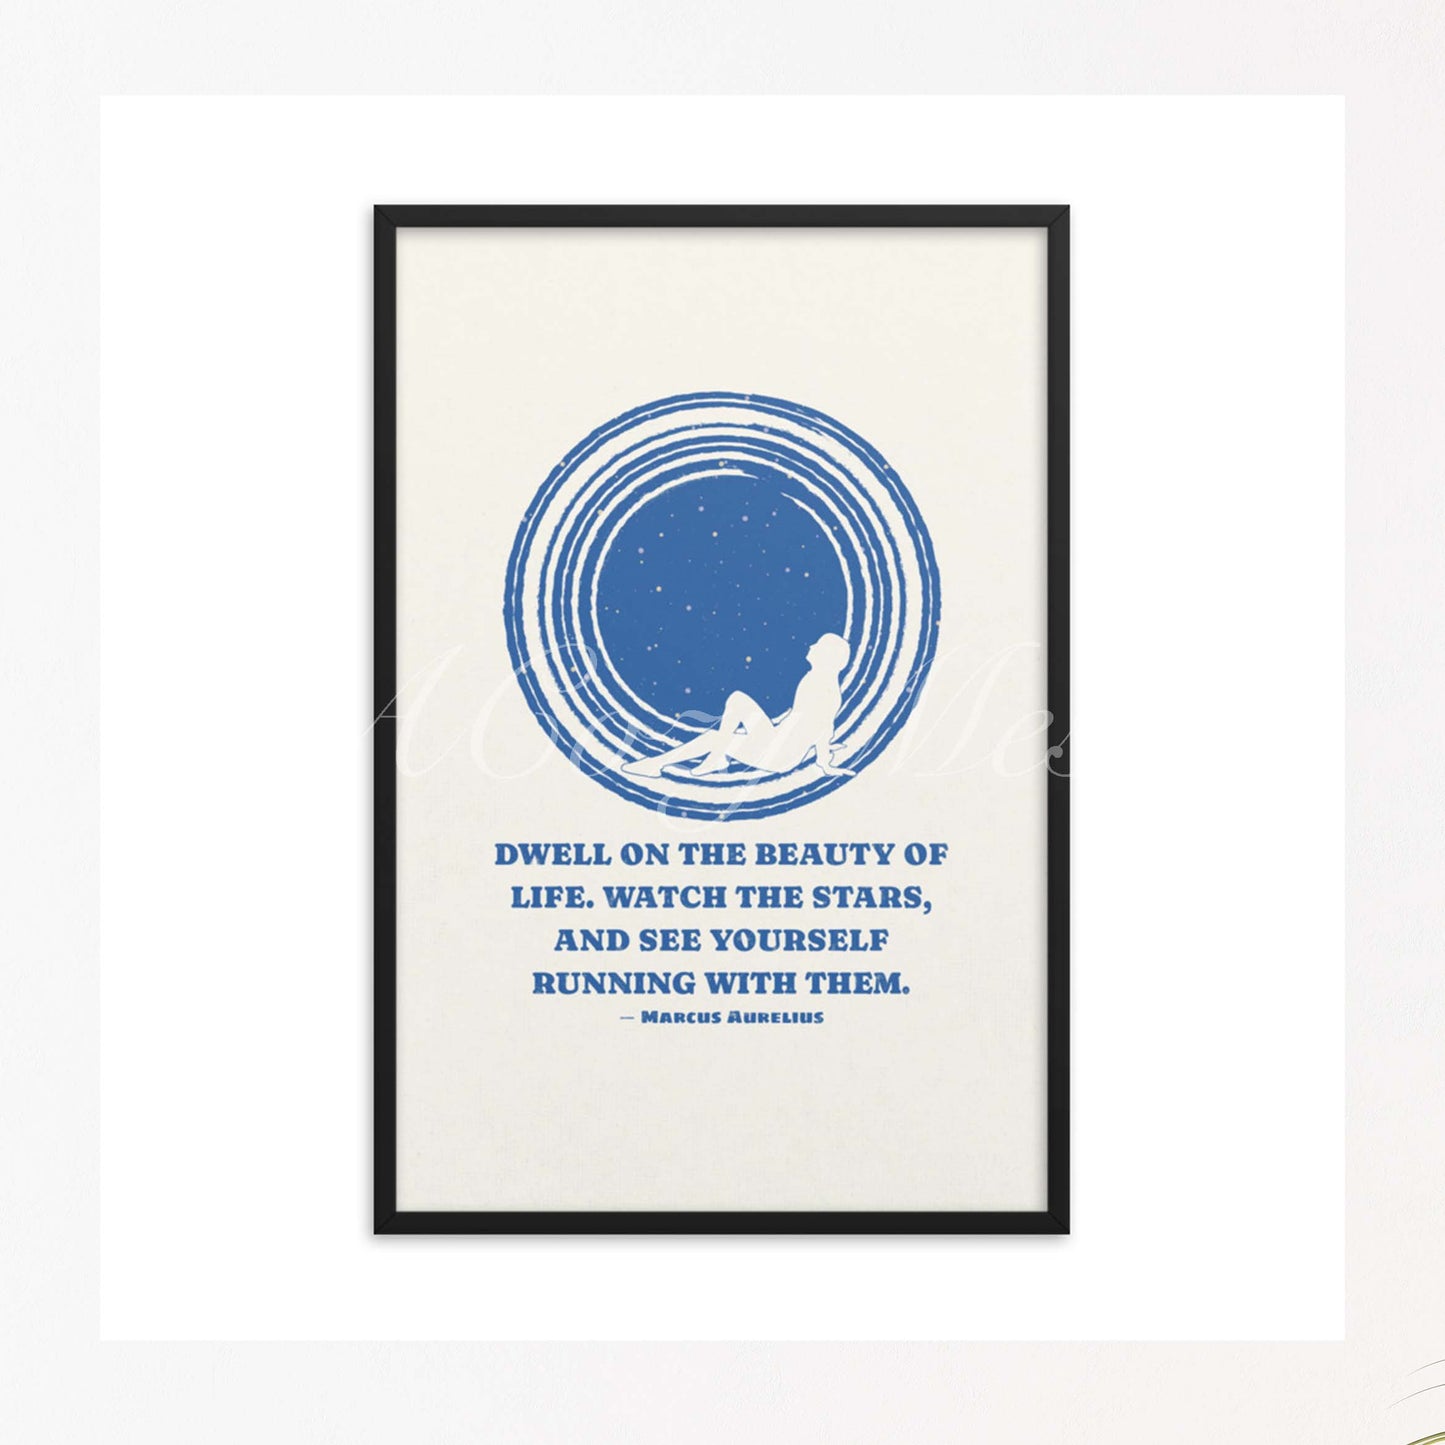 “Dwell on the beauty of life. Watch the stars, and see yourself running with them.” by marcus aurelius stoic quote with an illustration of a person looking at sky blue on white in black frame.